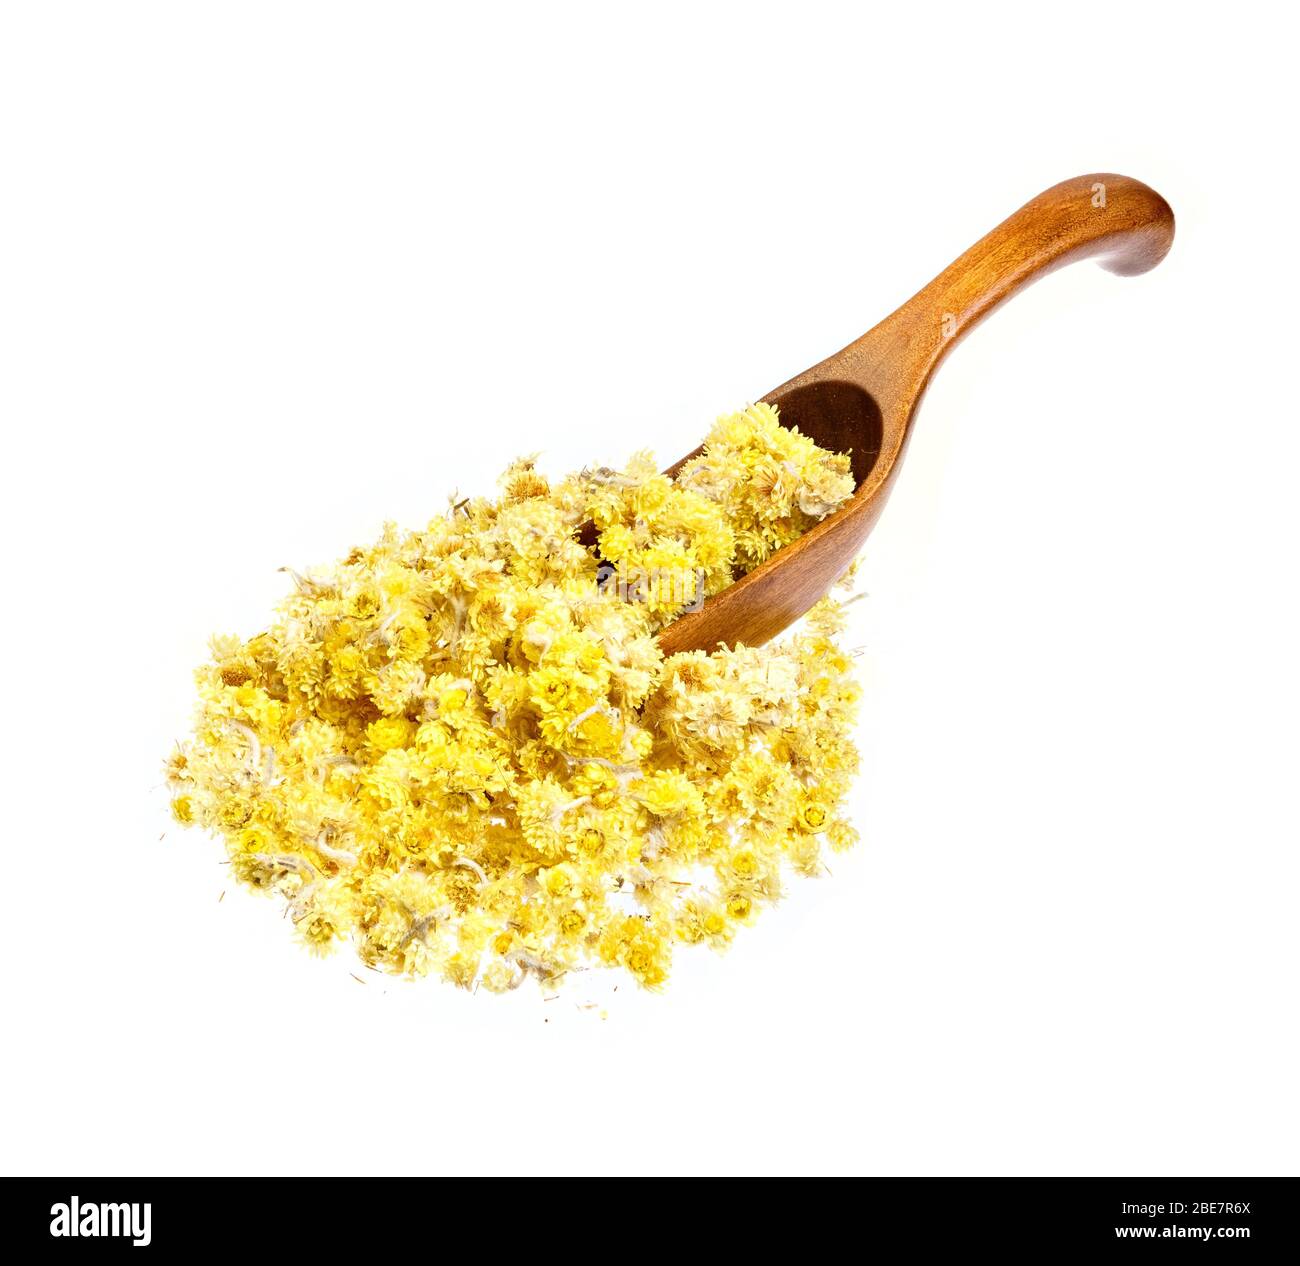 Helichrysum flowers on the wooden spoon, isolated. Stock Photo